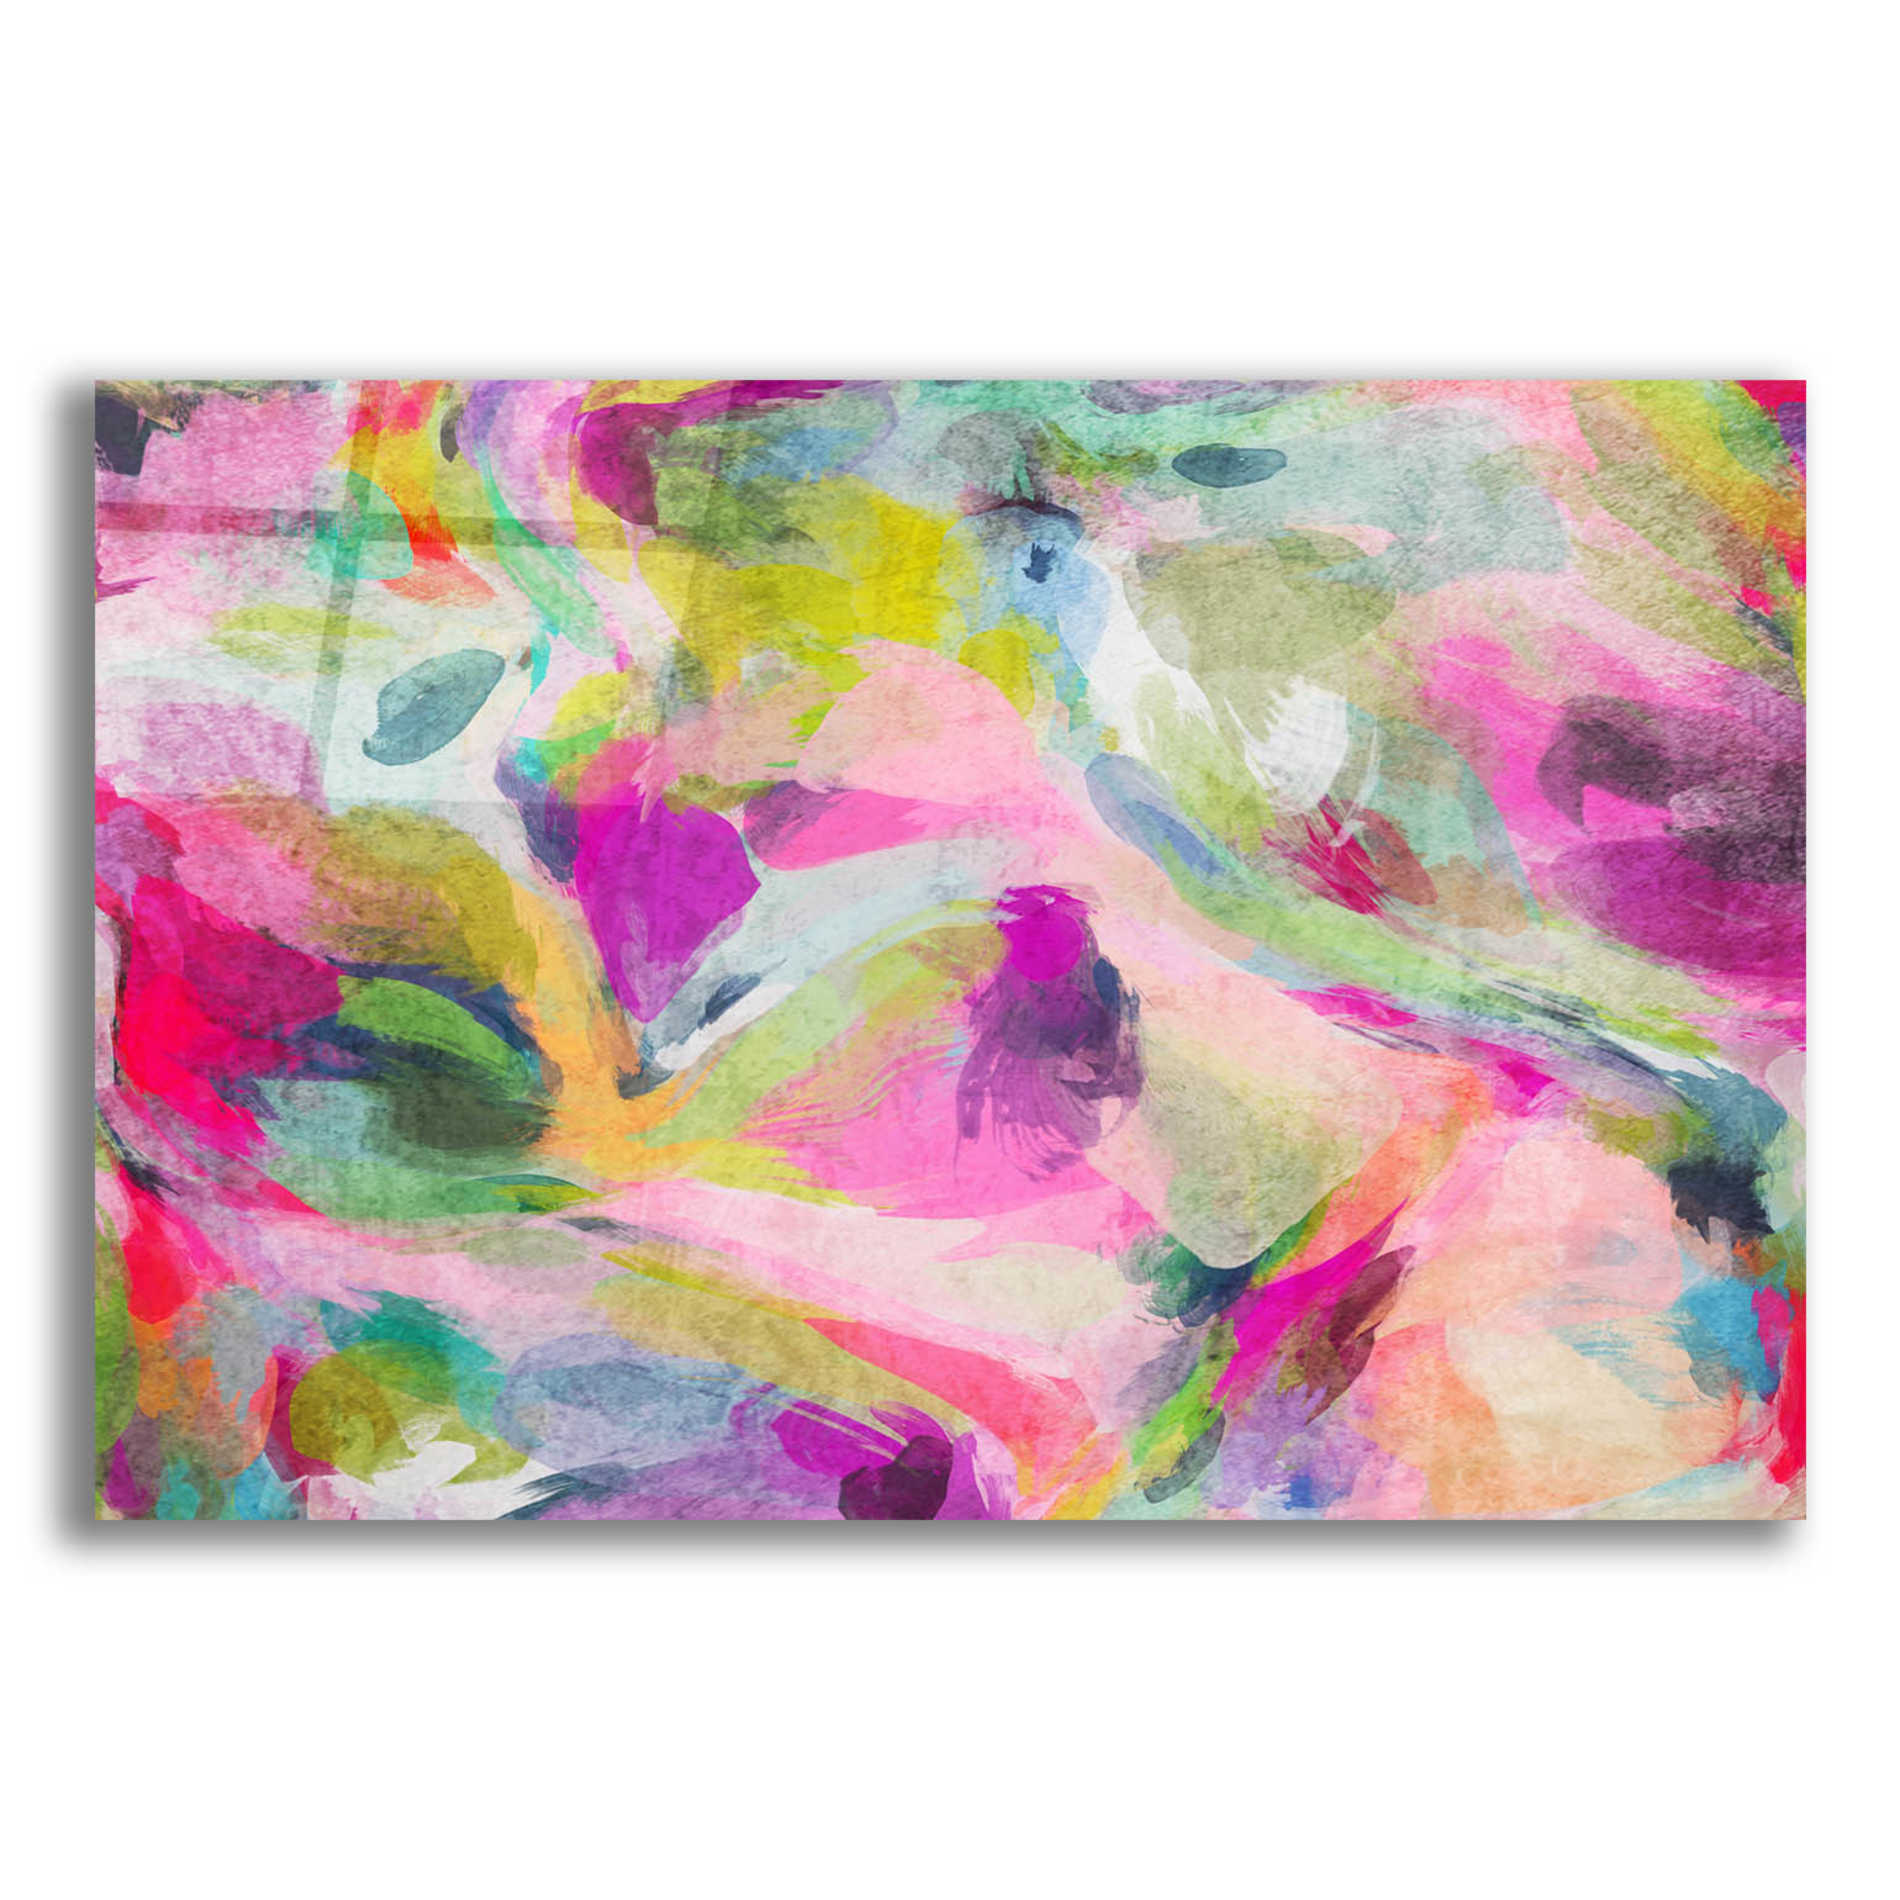 Epic Art 'Abstract Colorful Flows 3' by Irena Orlov Acrylic Glass Wall Art,24x16